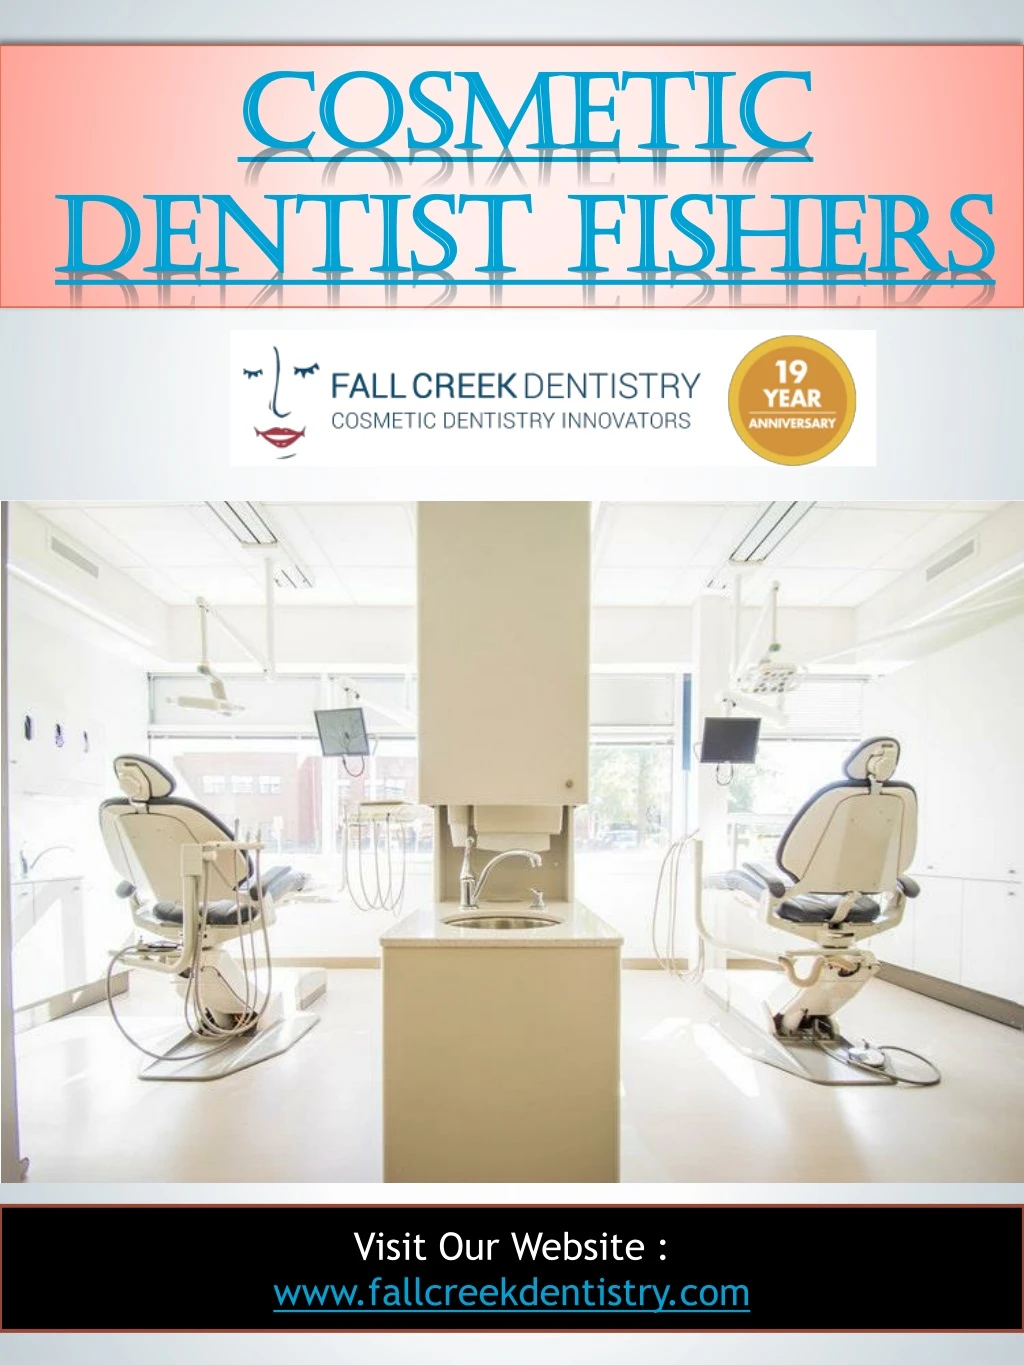 cosmetic dentist fishers